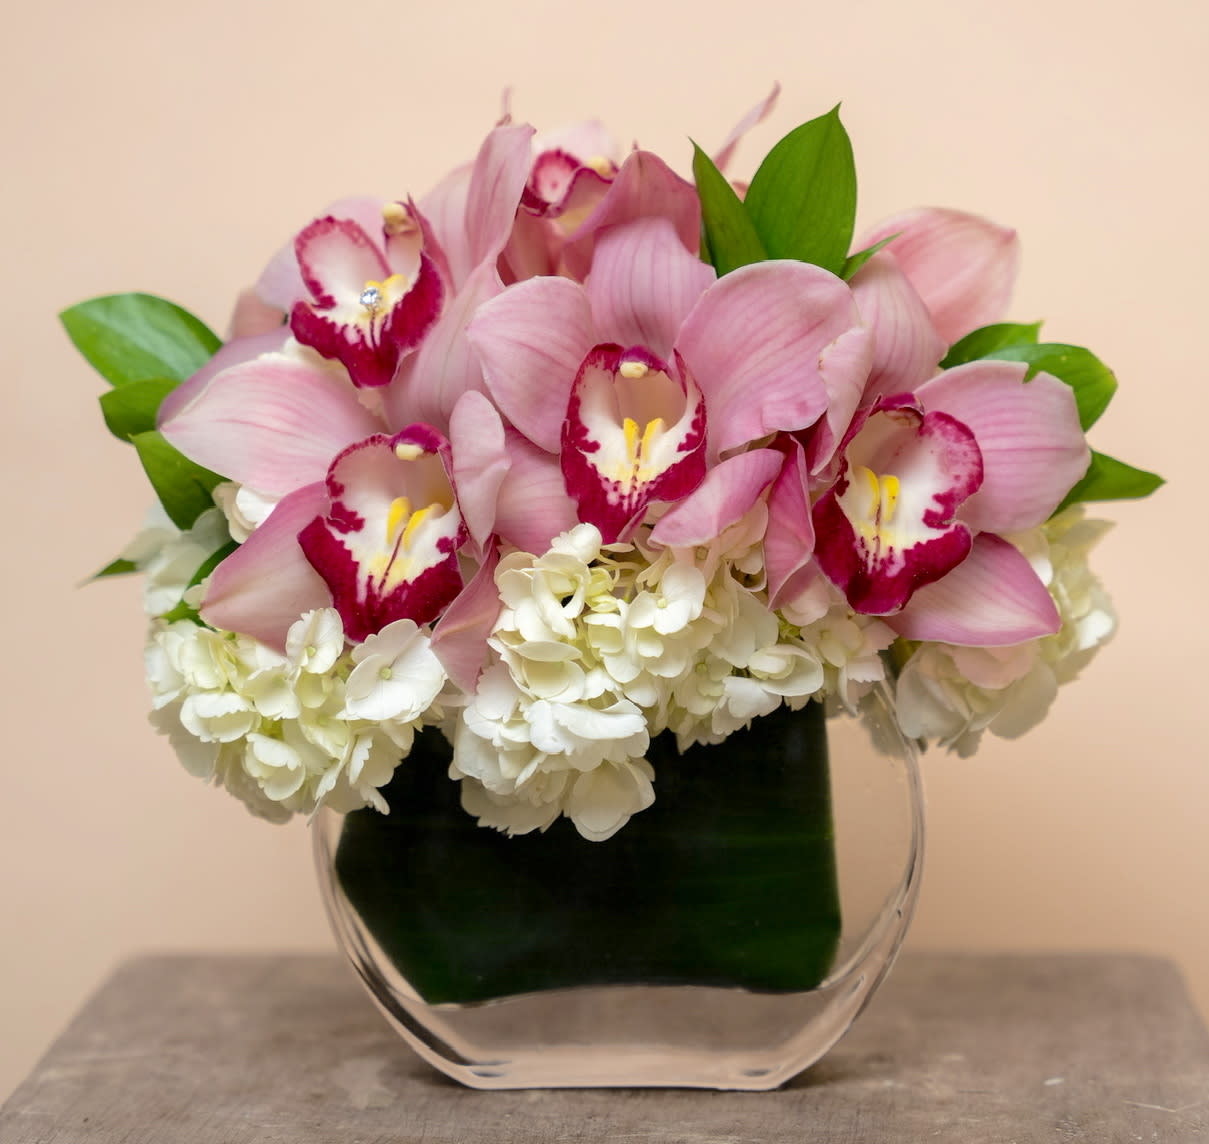 Vday 6 - Le Petit - The perfect unique petit gift that'll for sure put a smile on their face. Half a dozen exotic Cymbidium Orchids on a bed of Hydrangeas with a beautiful Ti Leaf-lined vase. Perfect as an add-on for a daughter, a gift for a friend to let them know you're thinking of them, or a loved one who has a perfect spot at home for this cutie. 